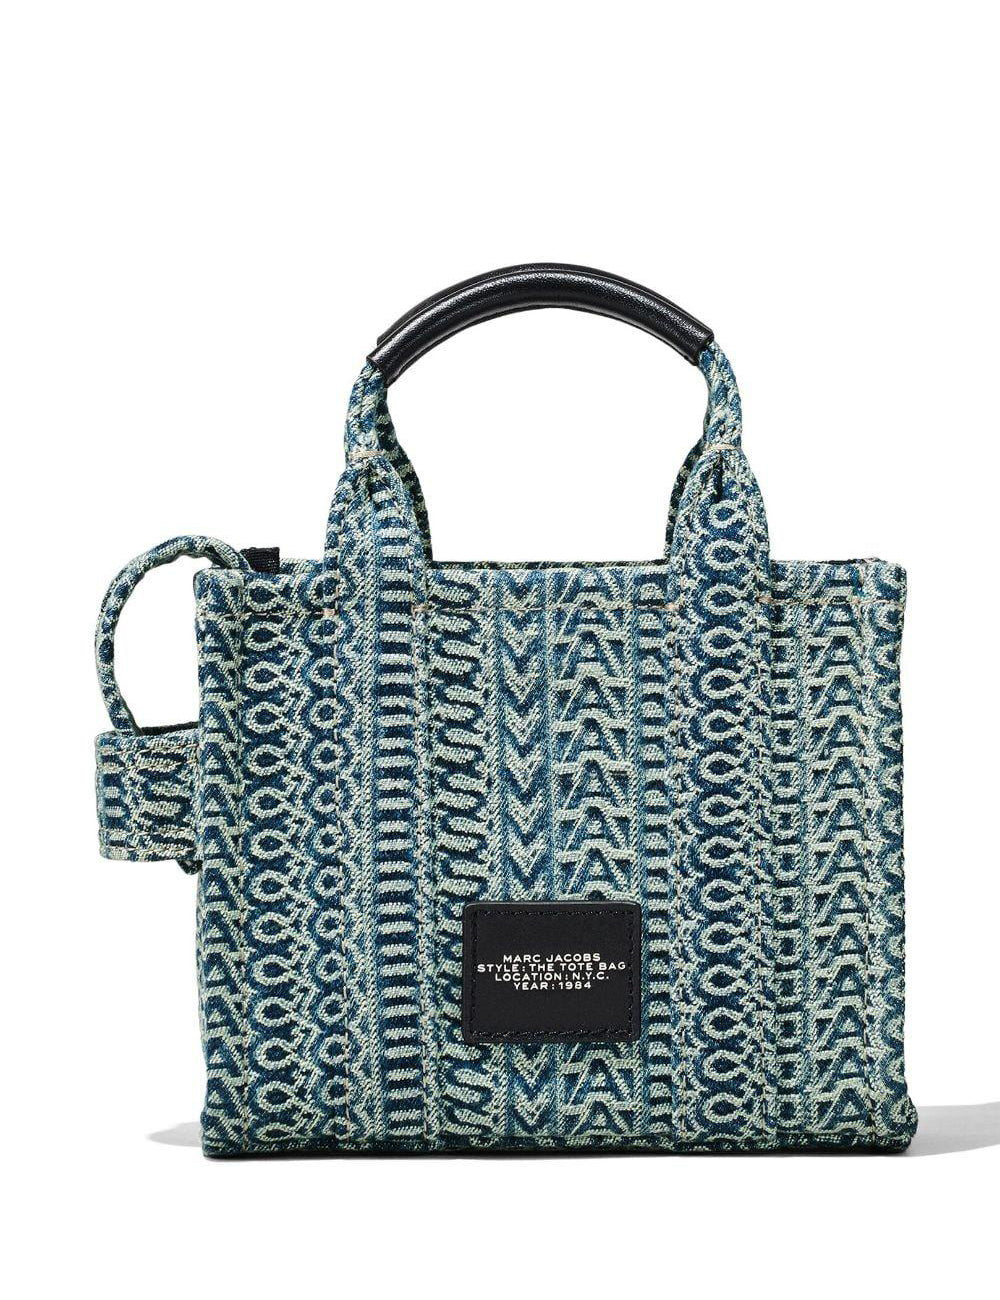 MARC JACOBS THE MICRO TOTE